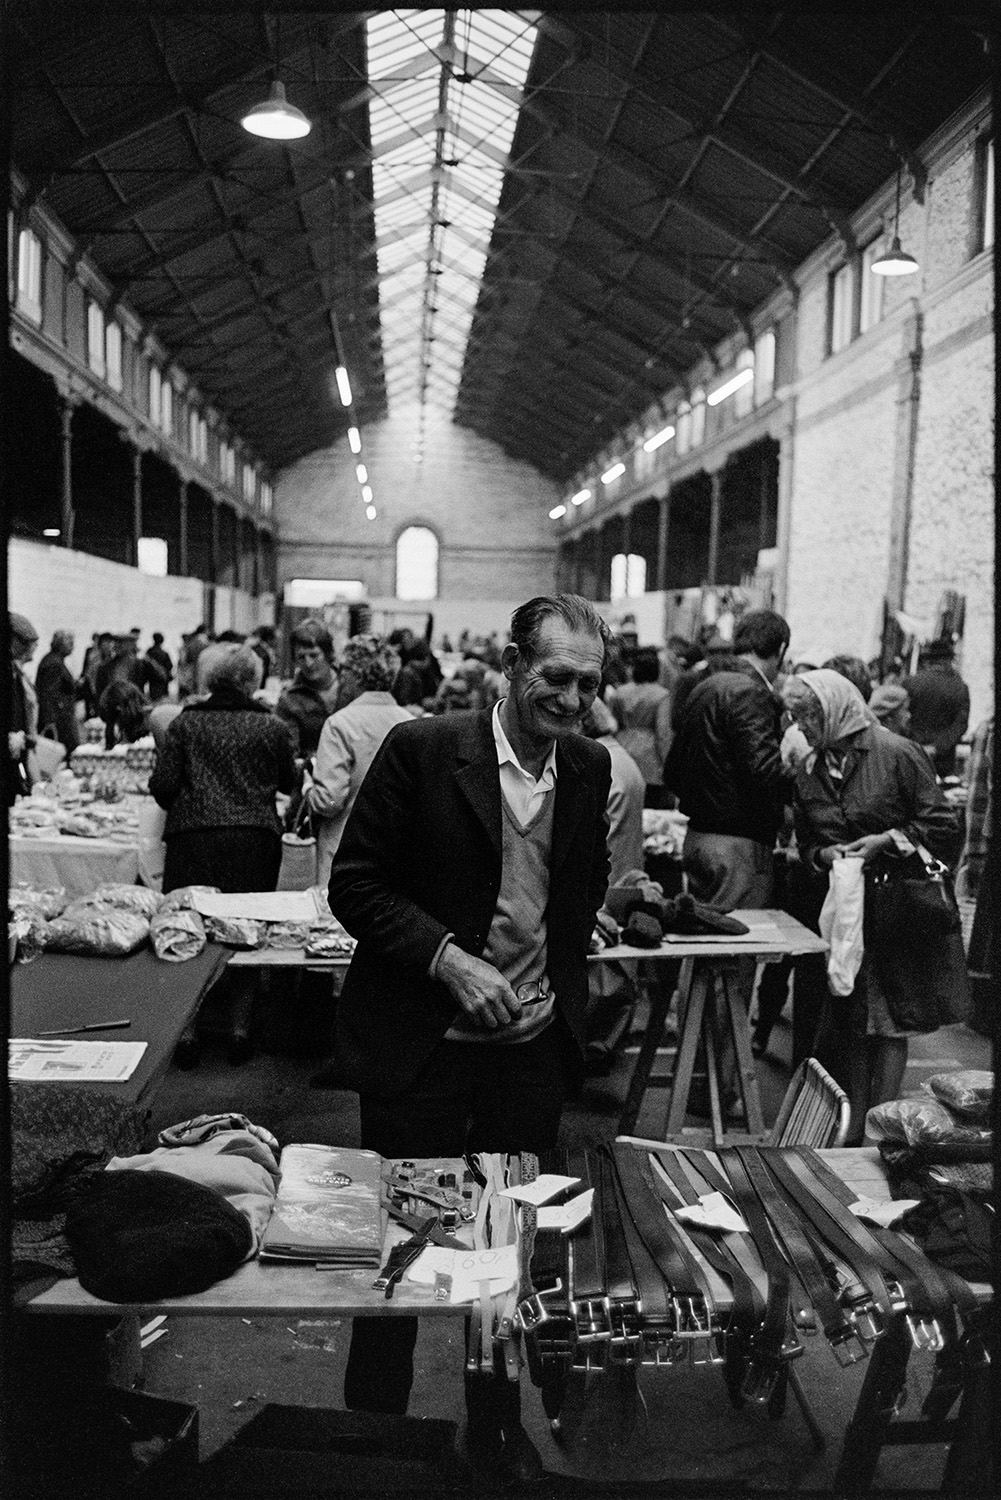 Market hall with stalls, fruit, vegetables and flowers, customers. 
[A man at his market stall selling leather goods at South Molton Pannier Market. Belts and watch straps are visible on the stall.]